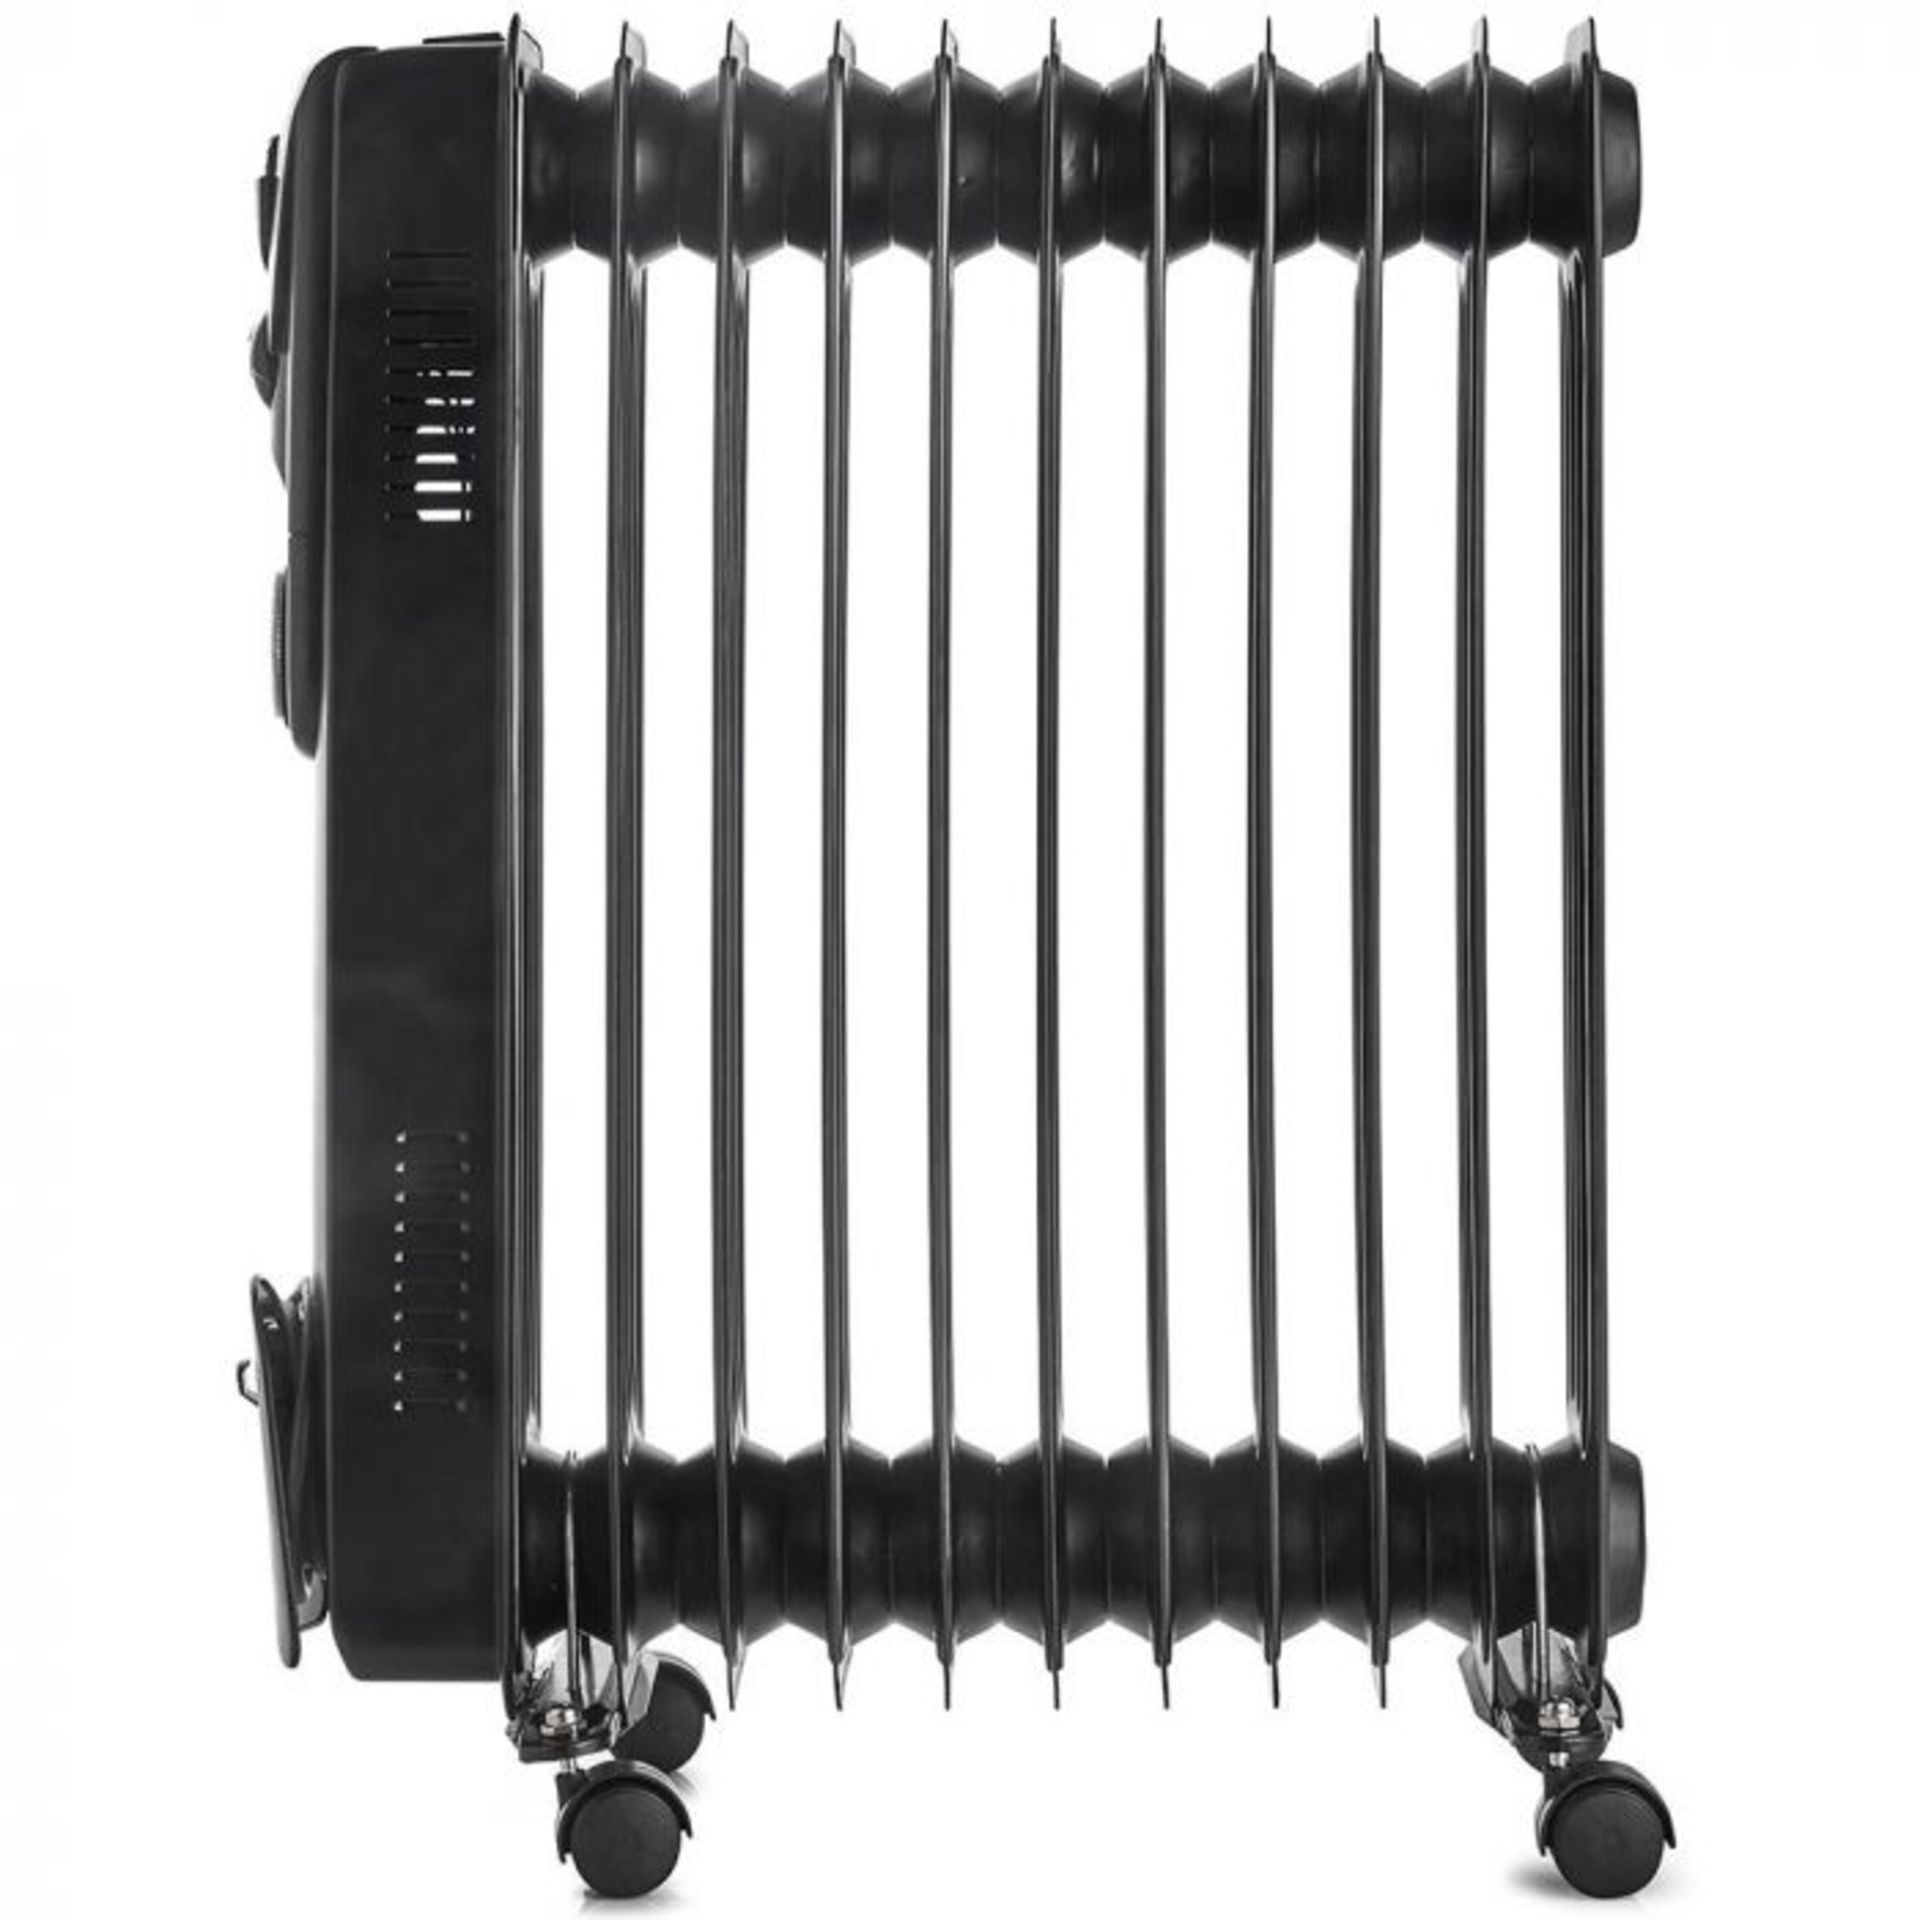 (S420) 11 Fin 2500W Oil Filled Radiator - Black 2500W radiator with 11 oil-filled fins for hea... - Image 3 of 4